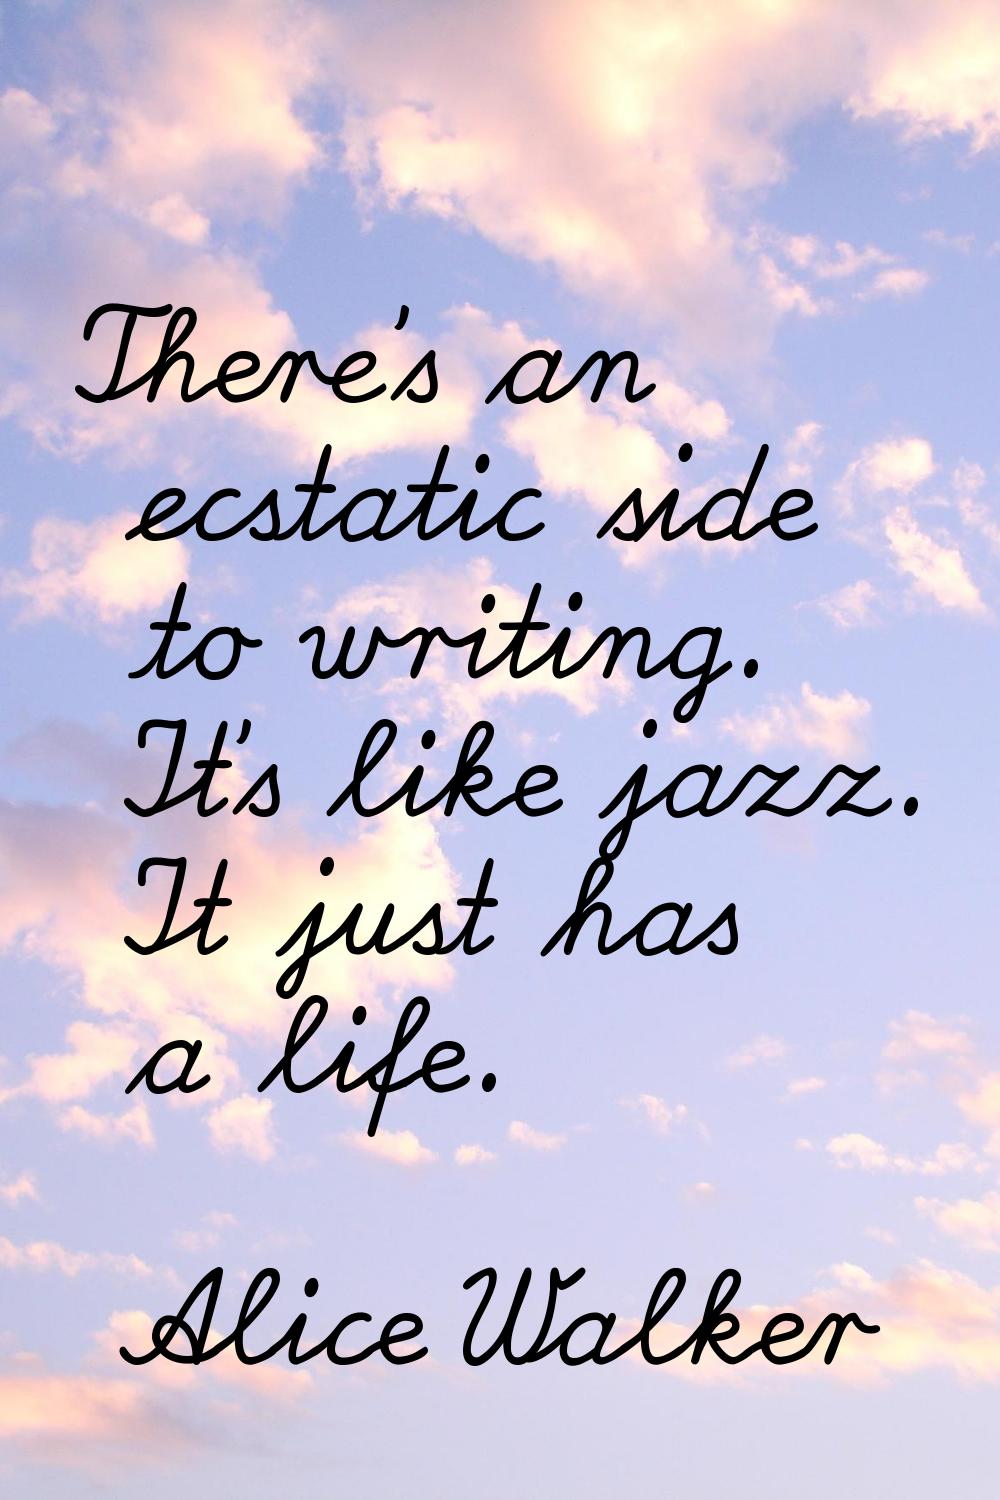 There's an ecstatic side to writing. It's like jazz. It just has a life.